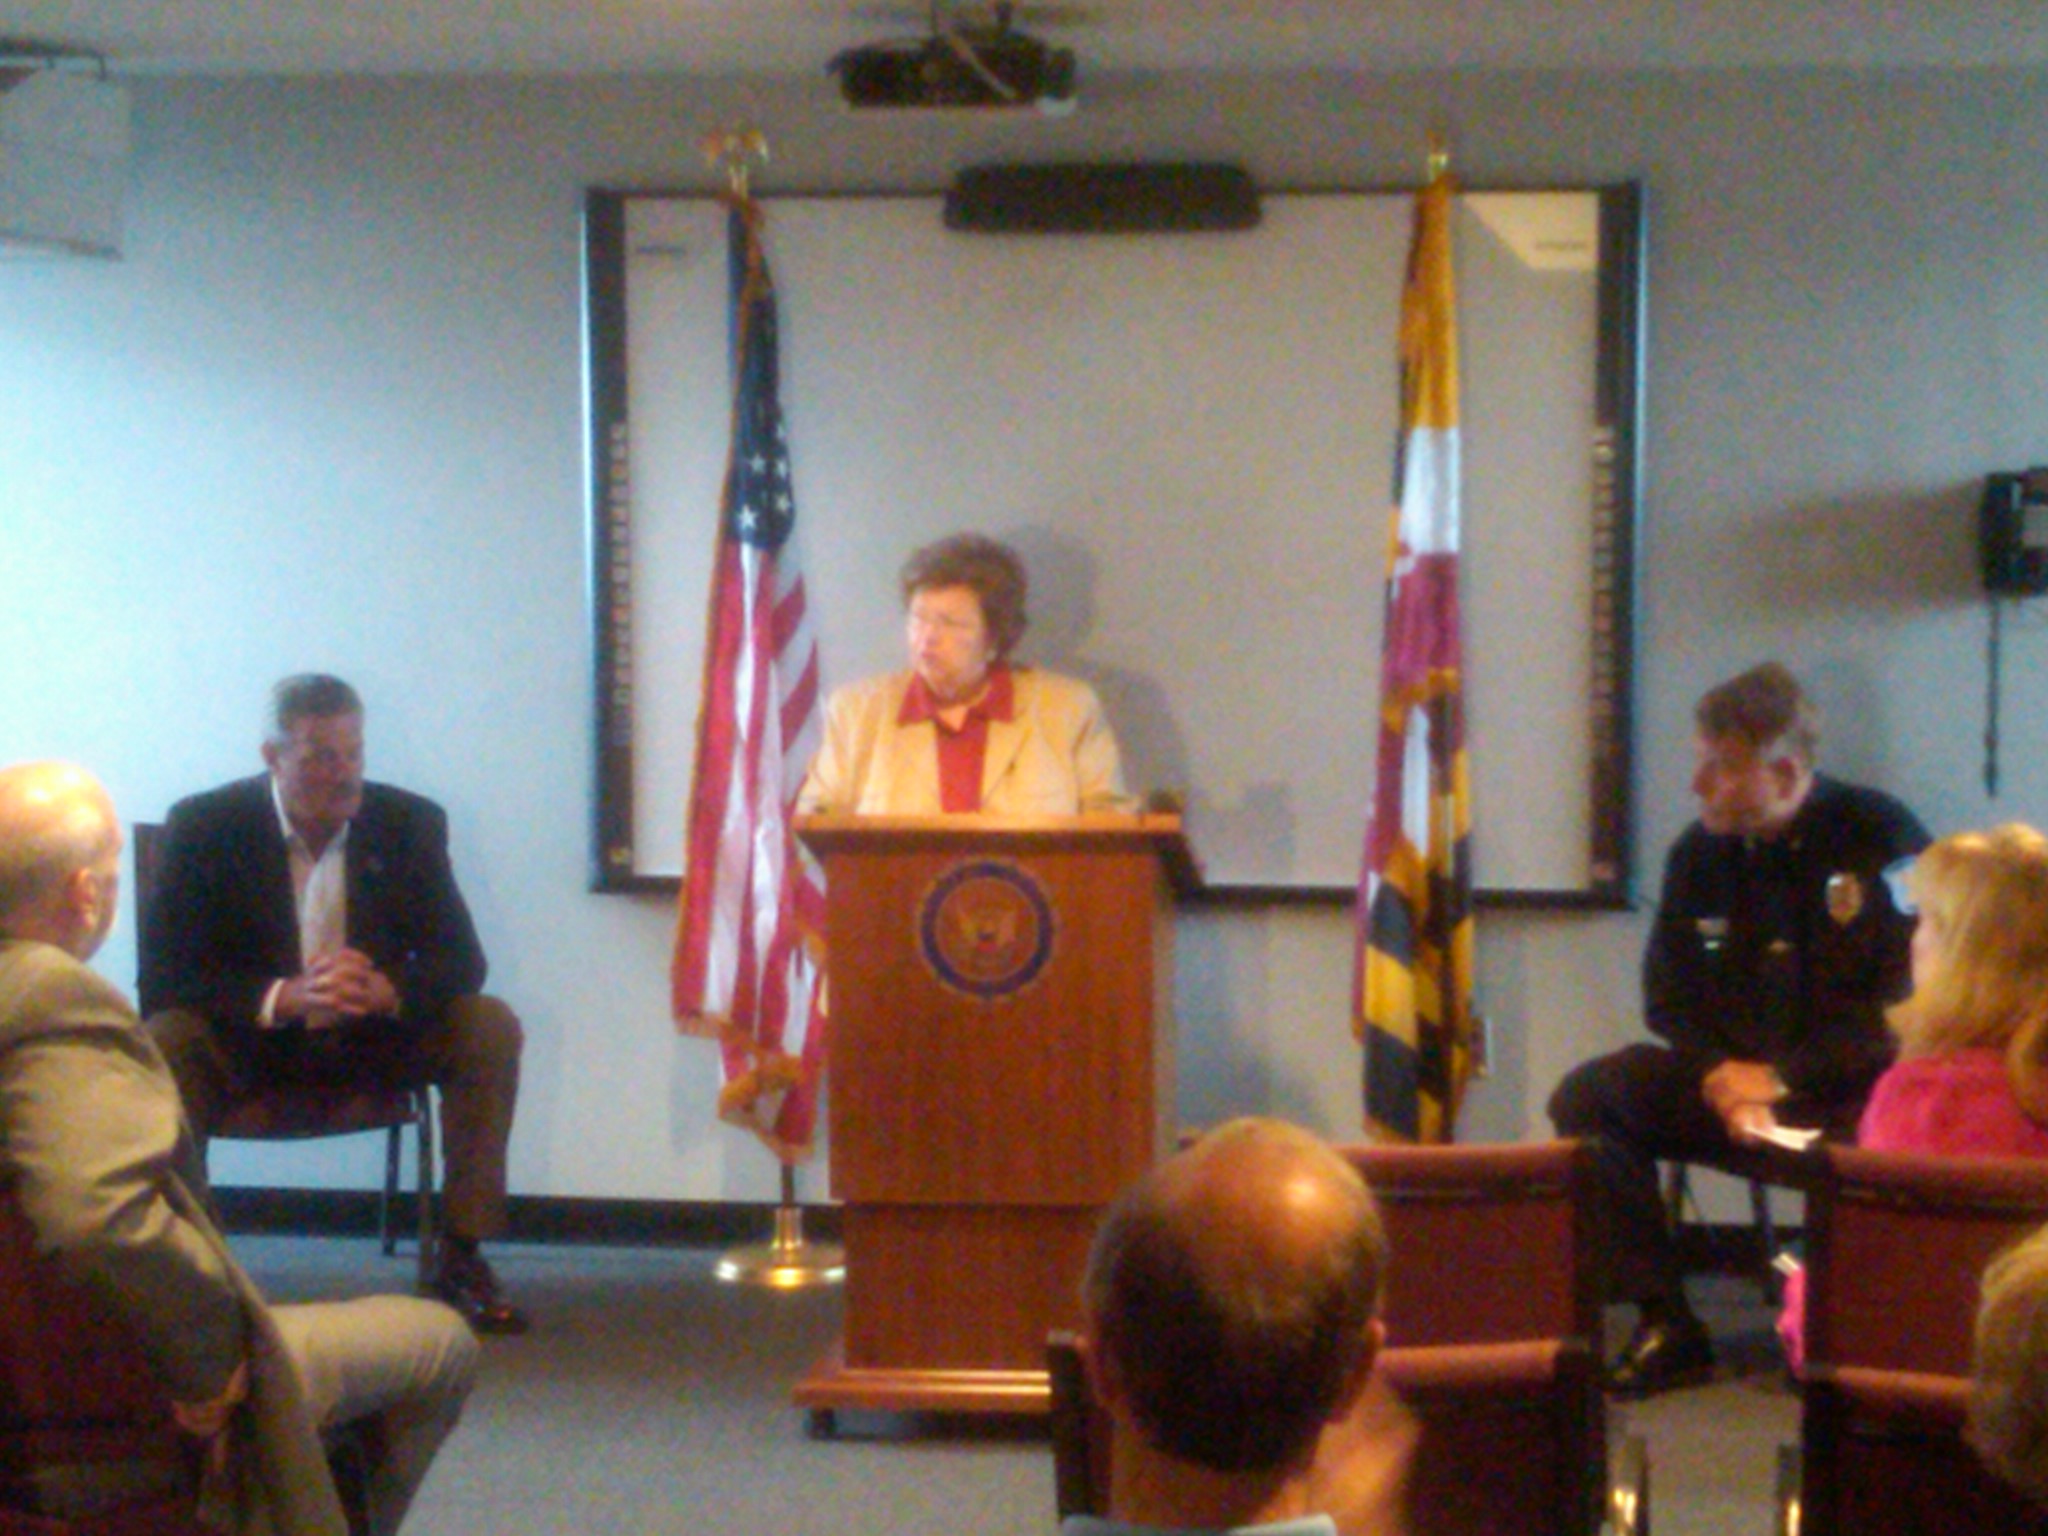 Mikulski Announces Federal Grant to Hire Police Officers in Hagerstown